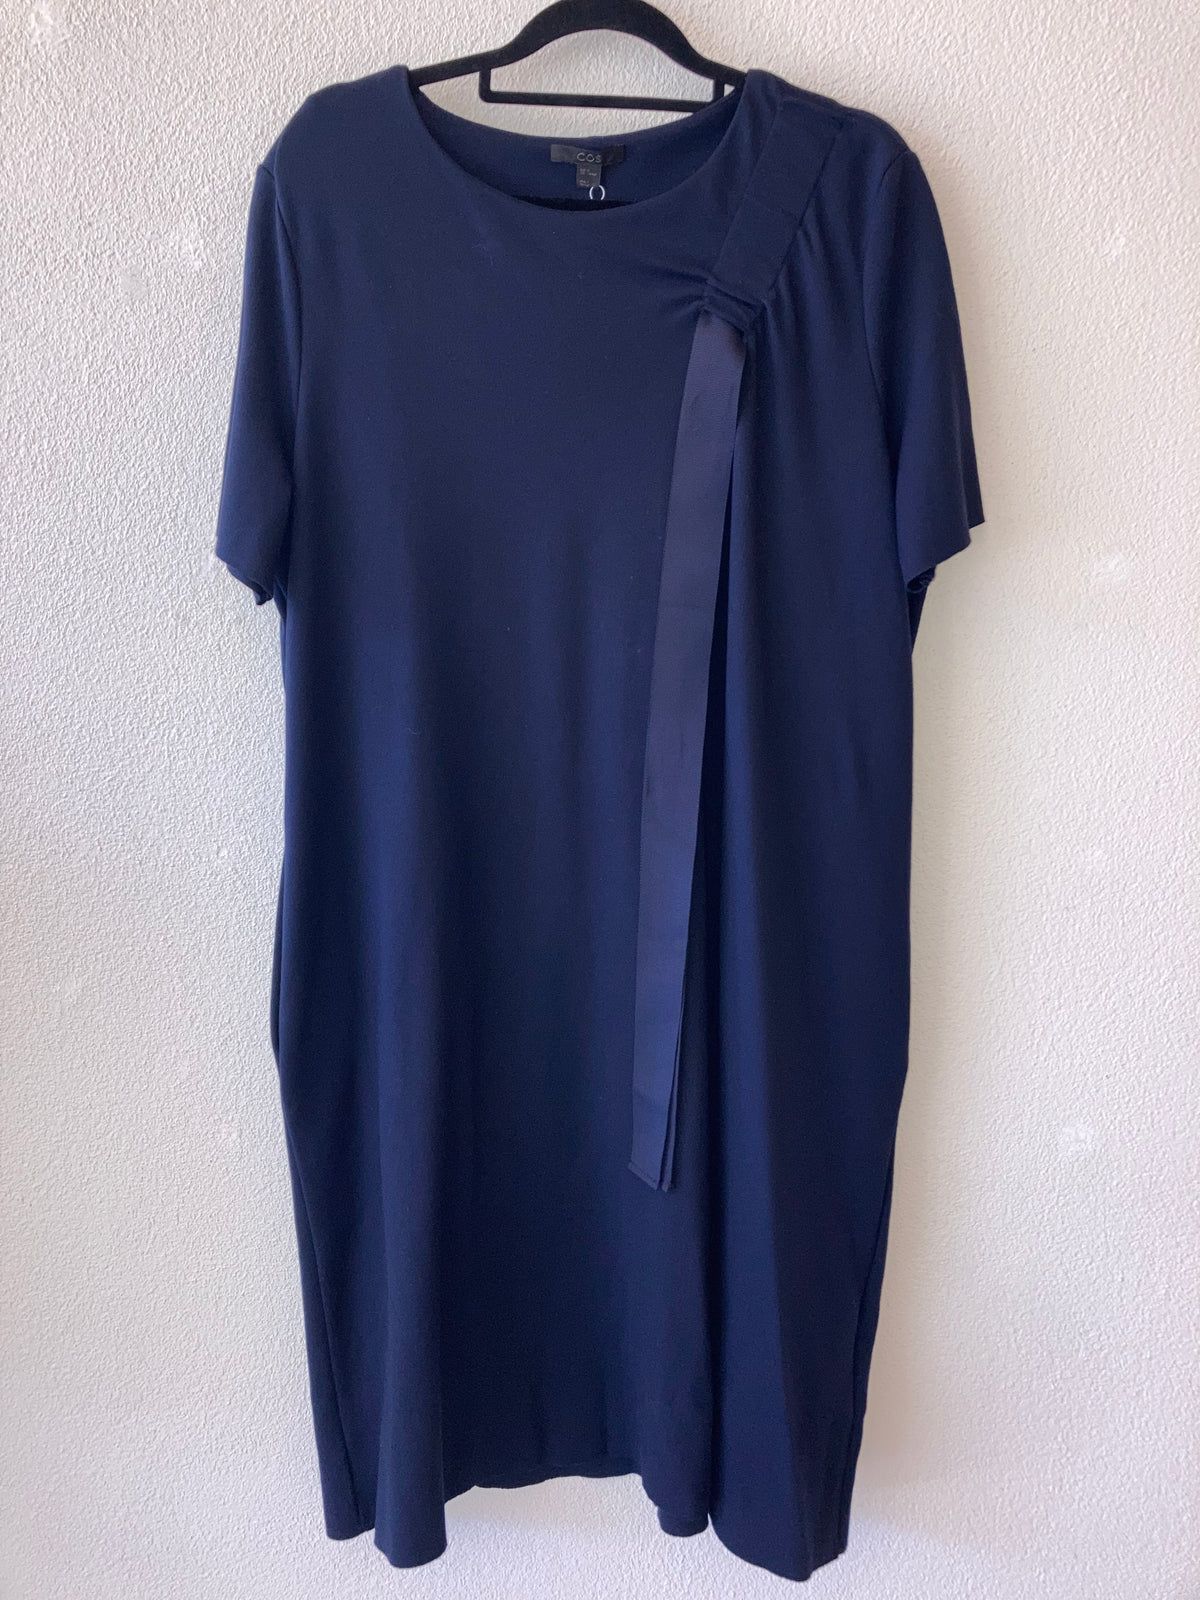 COS Navy Dress with Ribbon 10-12 10